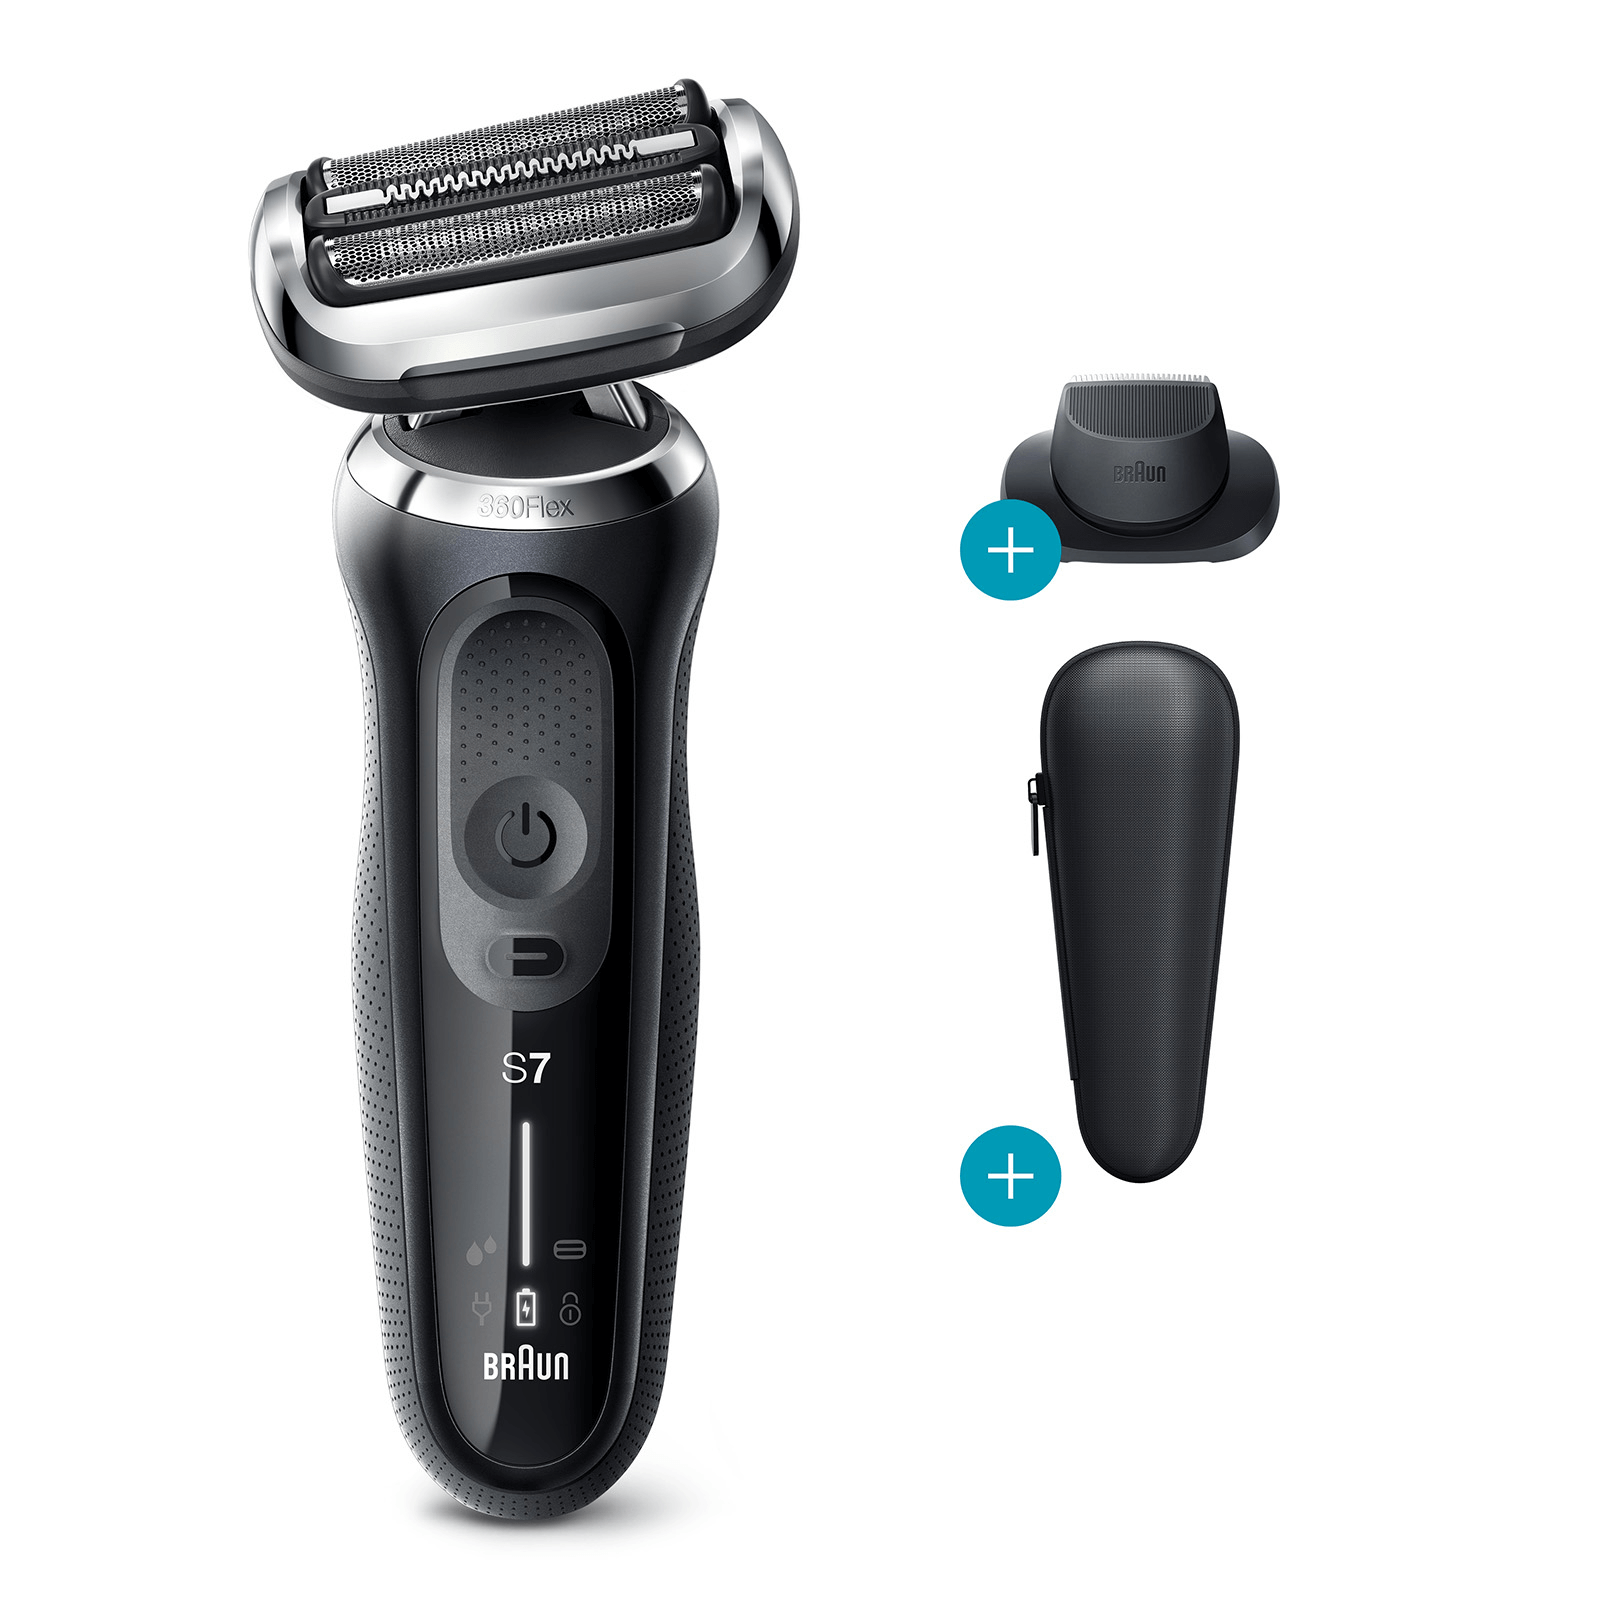 Braun Series 7 Master 70-N1200s Electric Shaver - Black - Precision Trimmer + Shaver Head Replacement